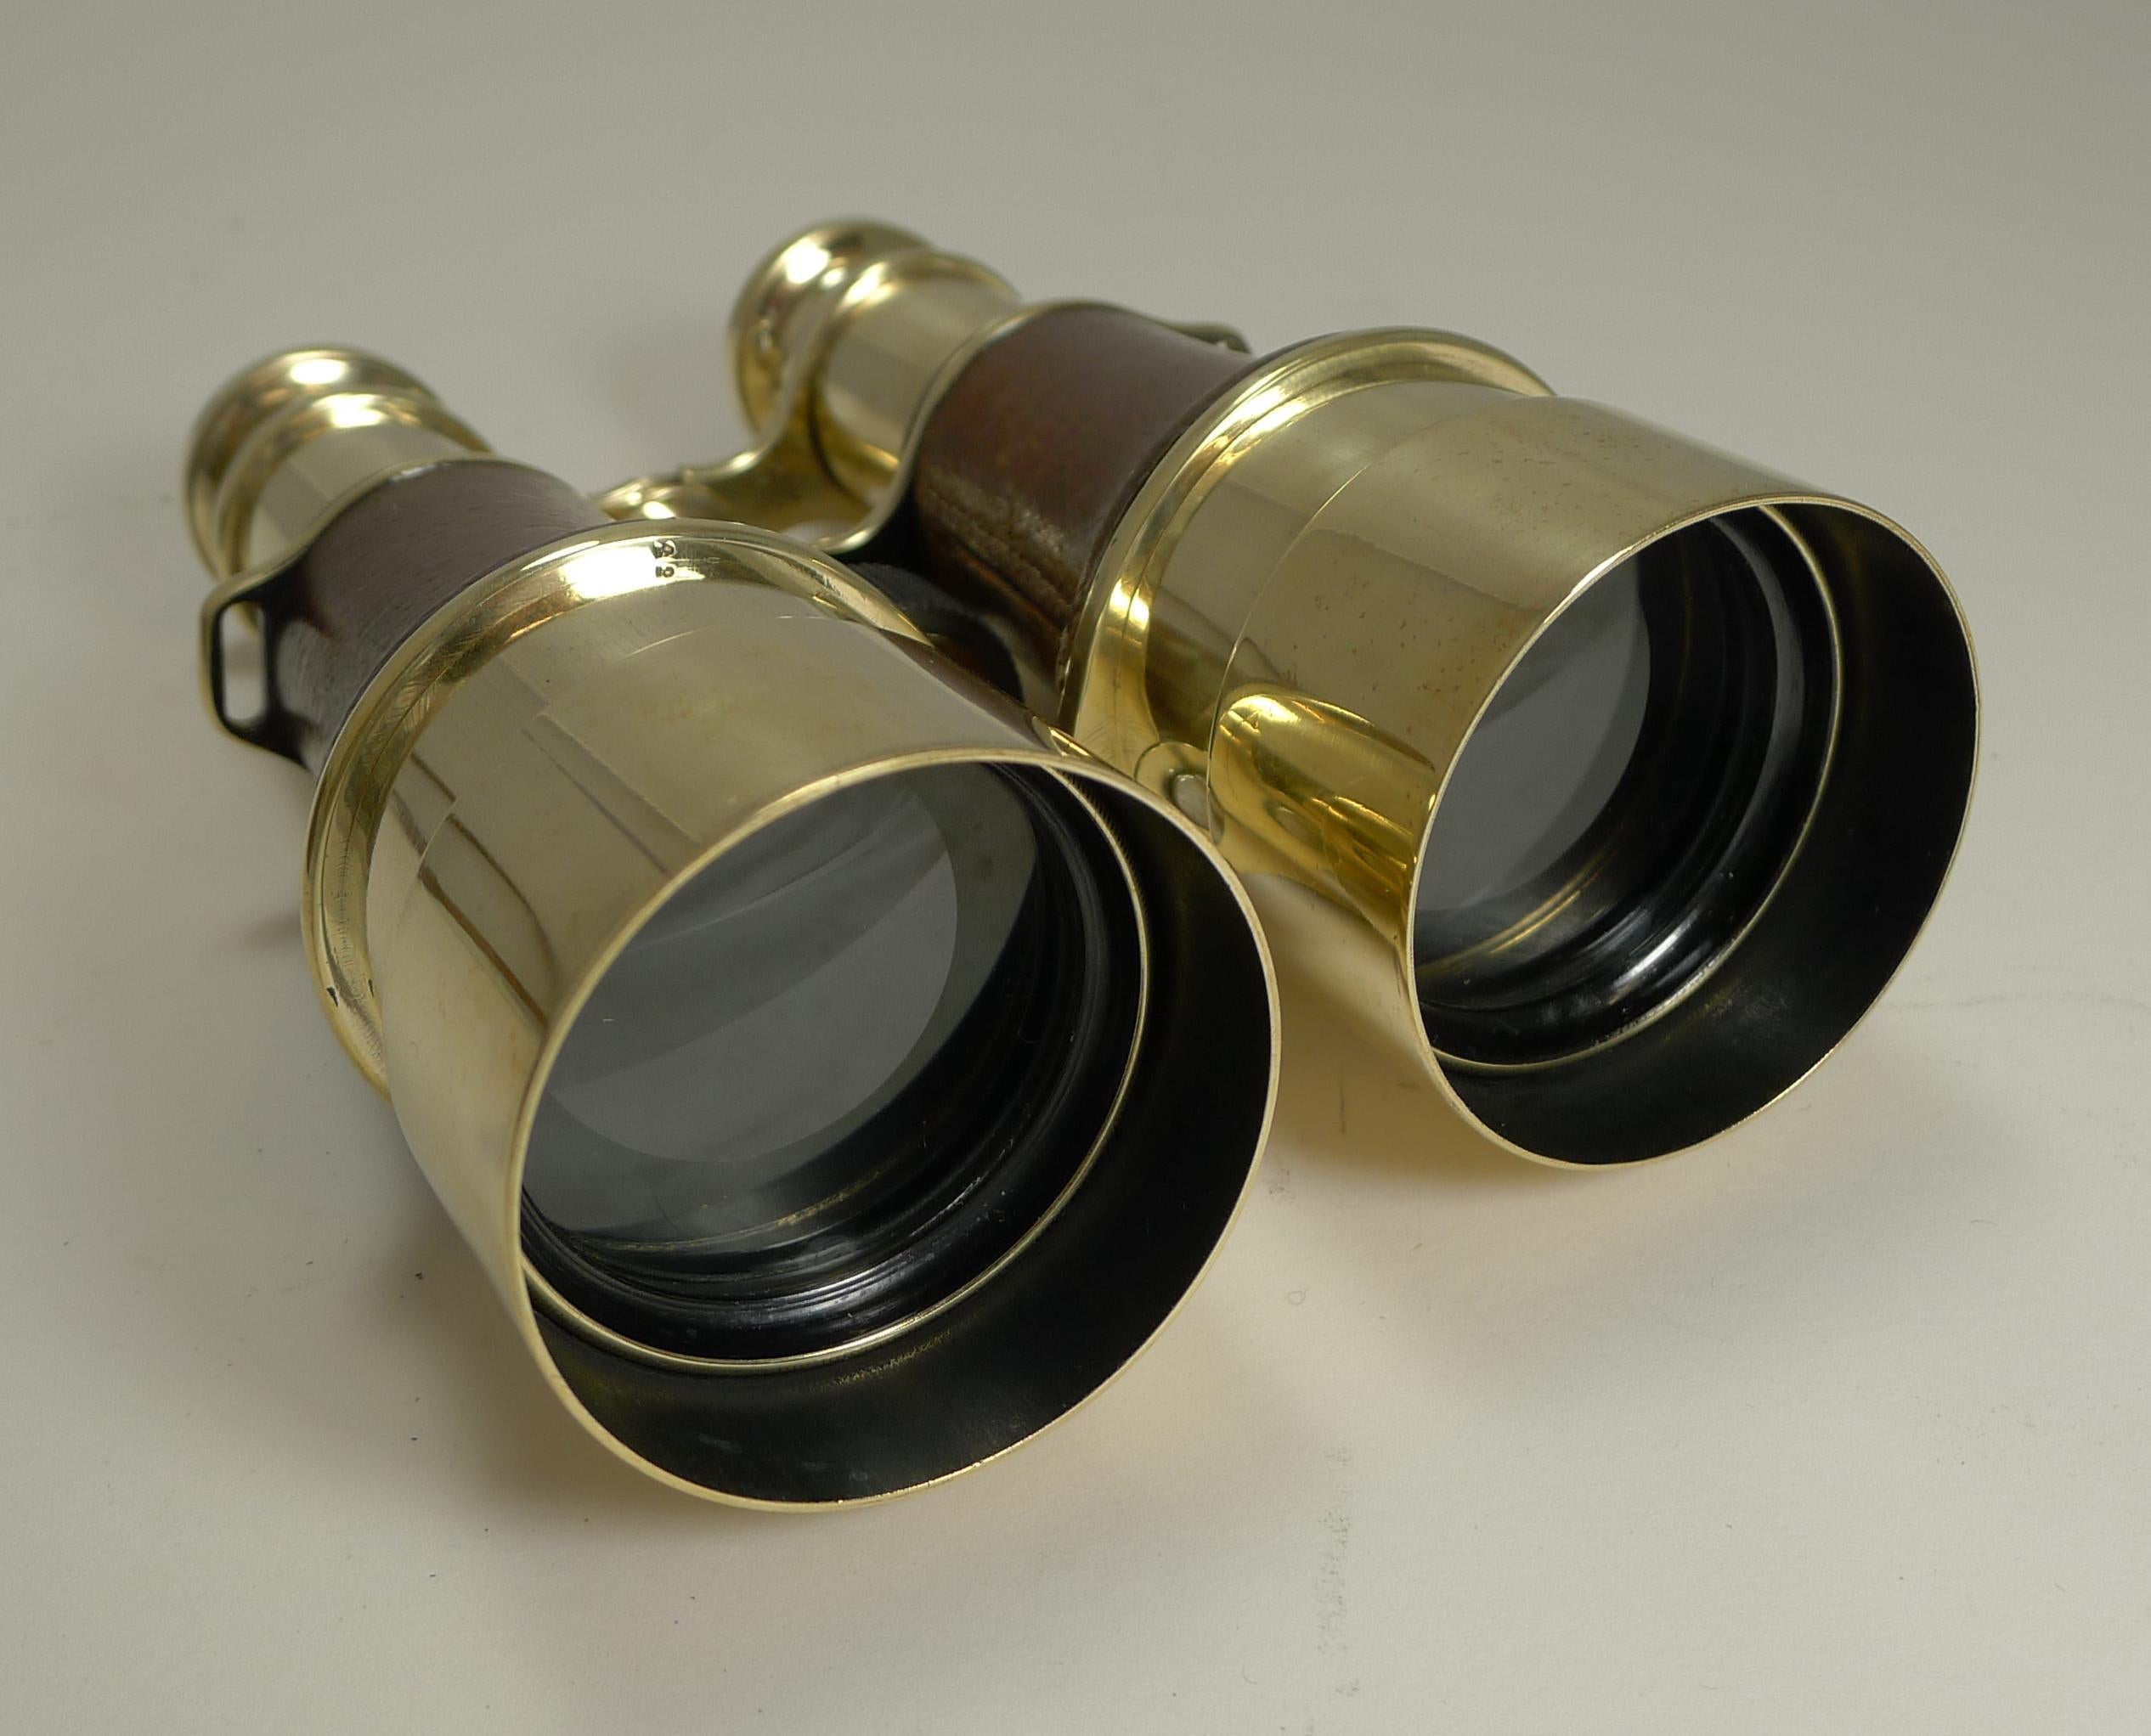 Early 20th Century WWI Issued Antique French Binoculars Signed L. Petit, Paris